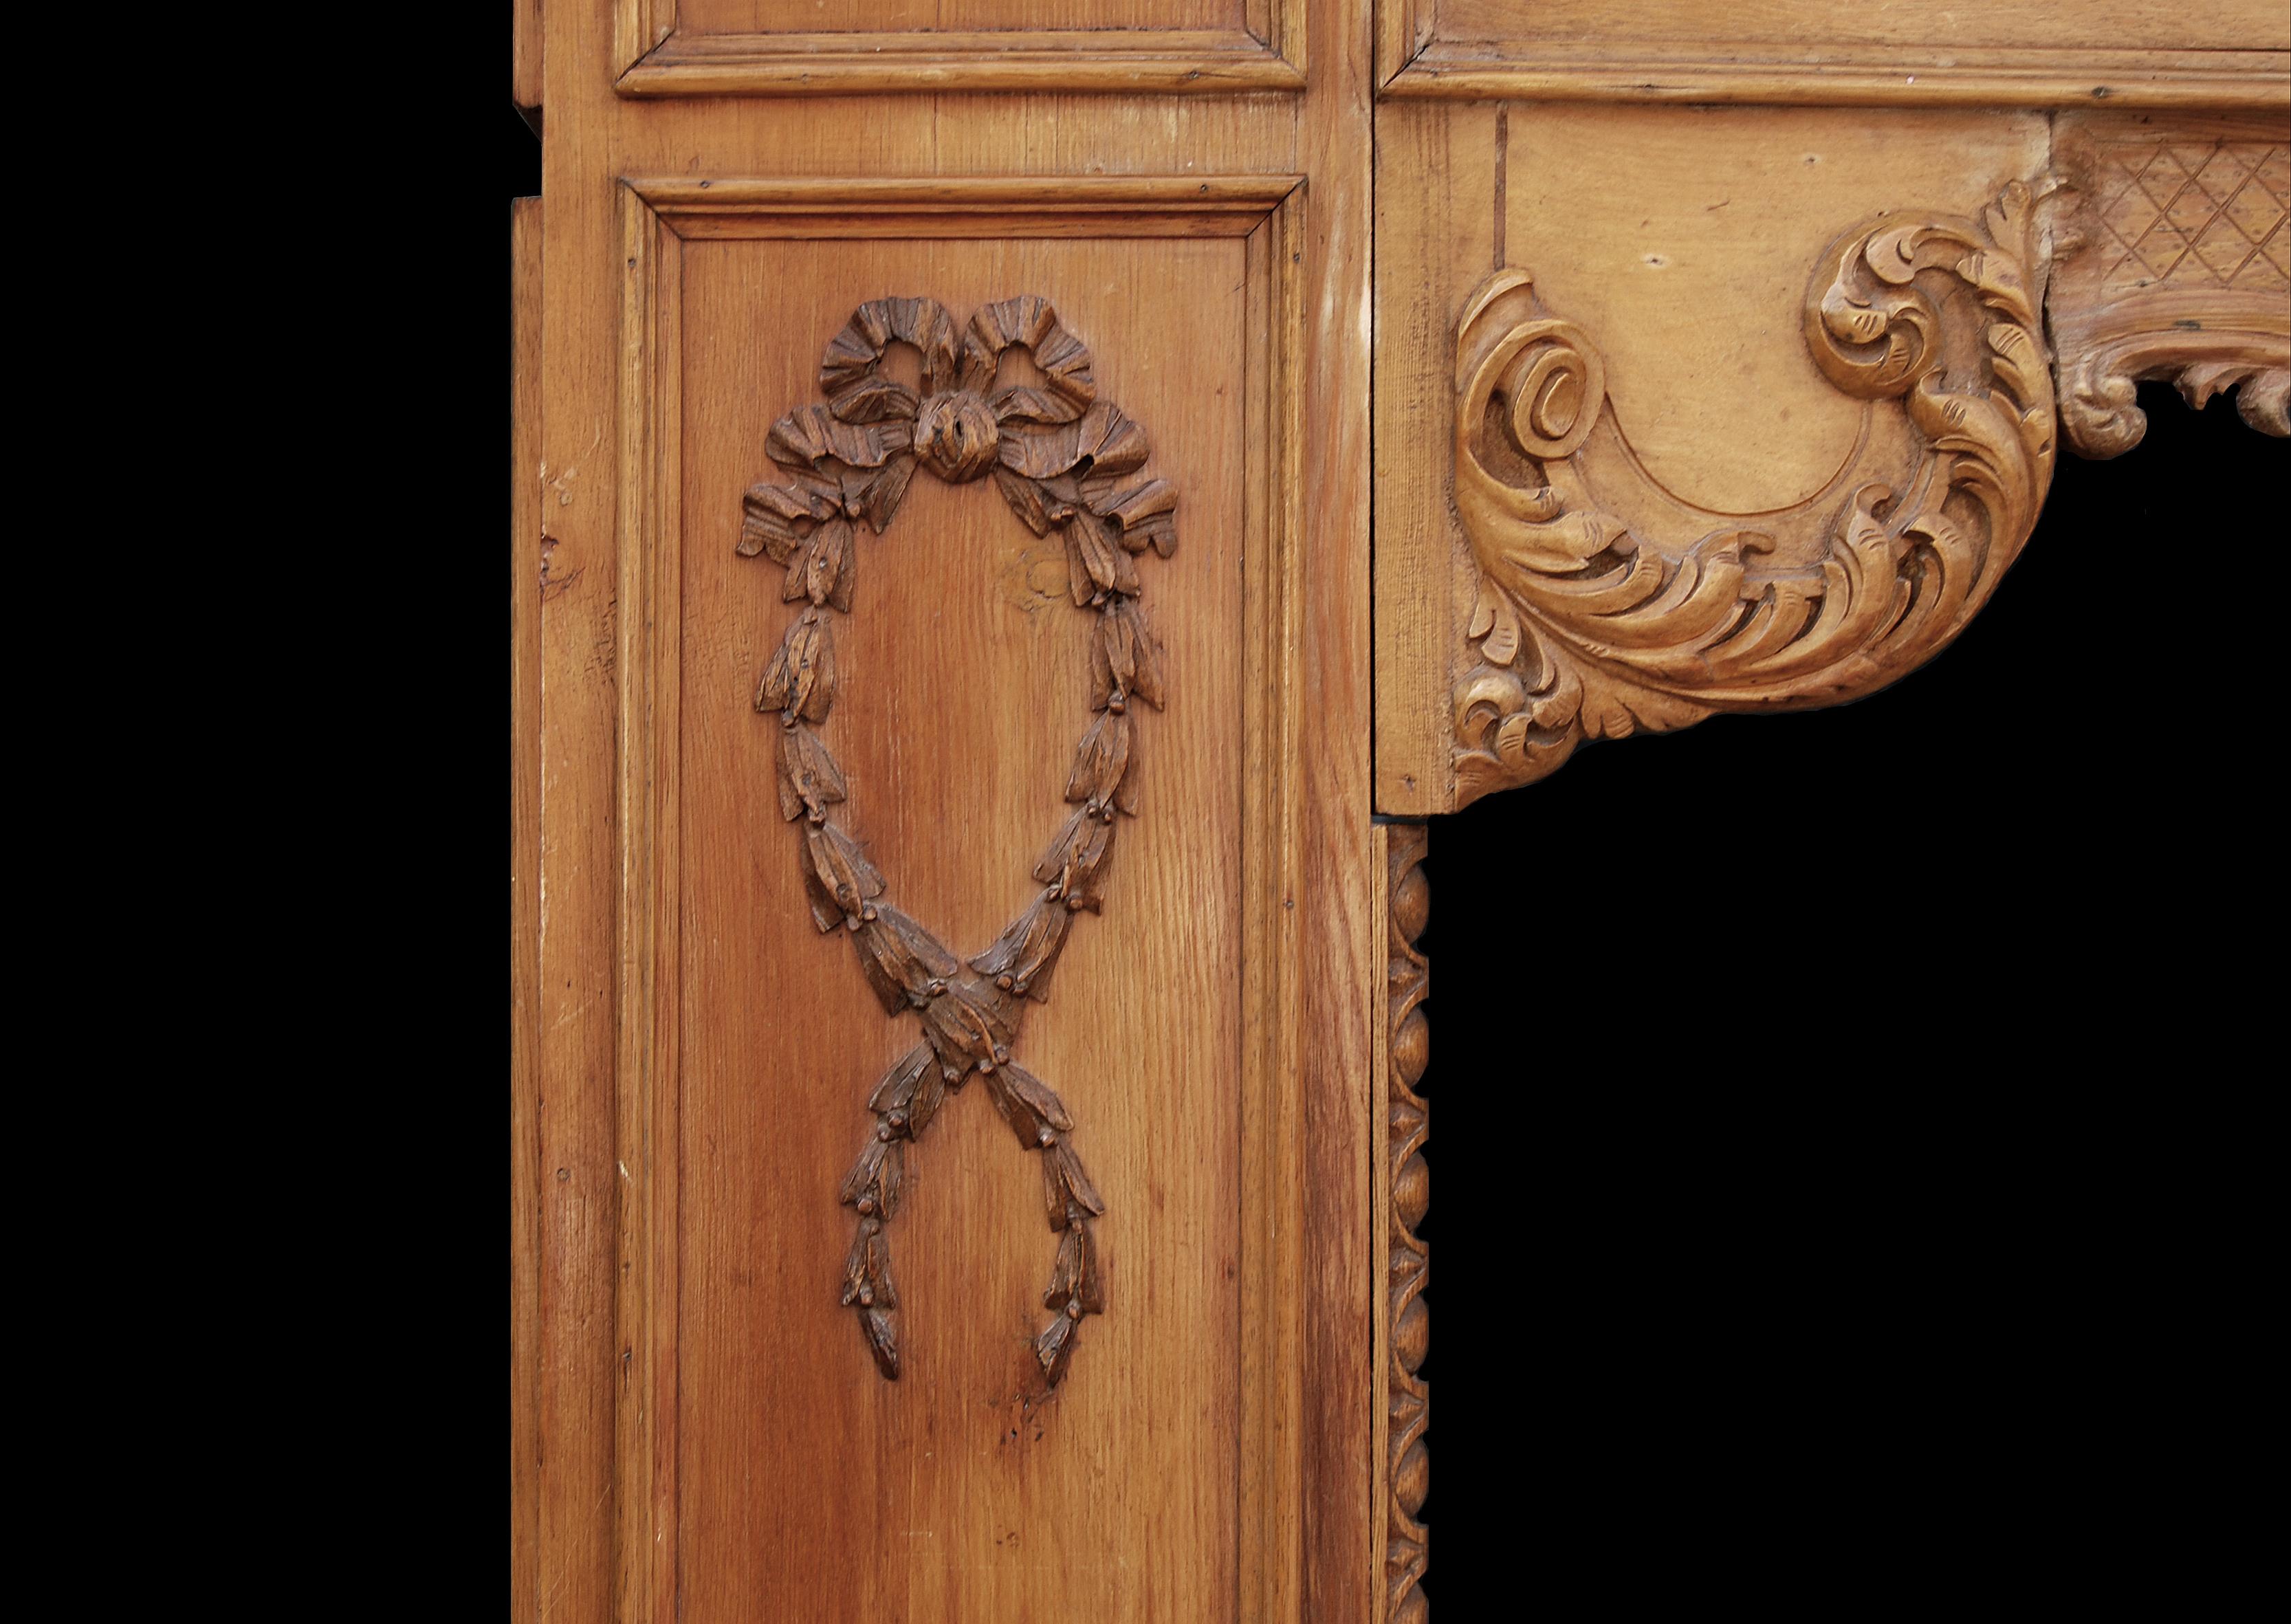 Late 19th-Early 20th Century English Carved Wood Fireplace In Good Condition For Sale In London, GB